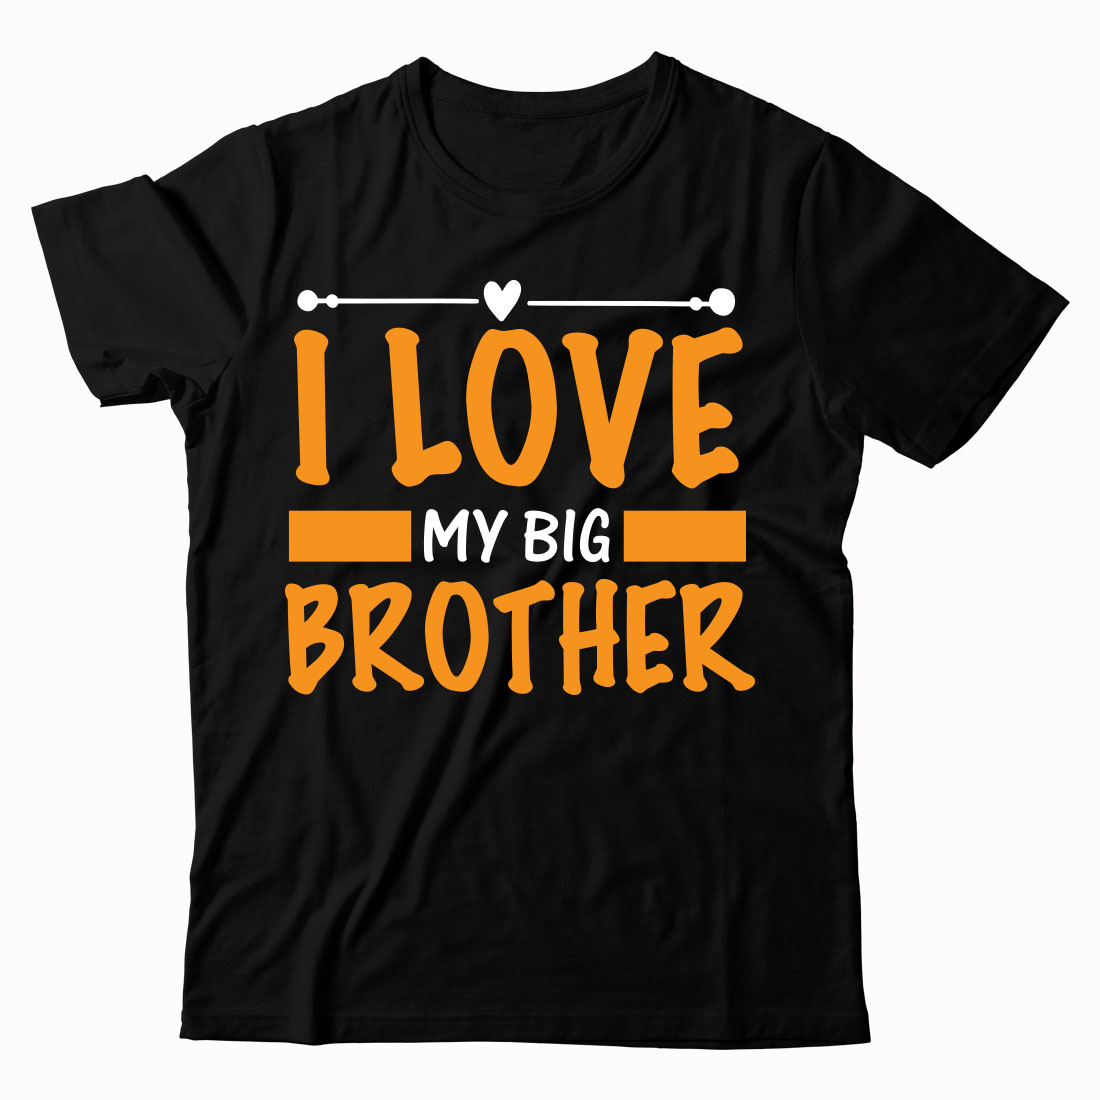 Black t - shirt with the words i love my big brother.